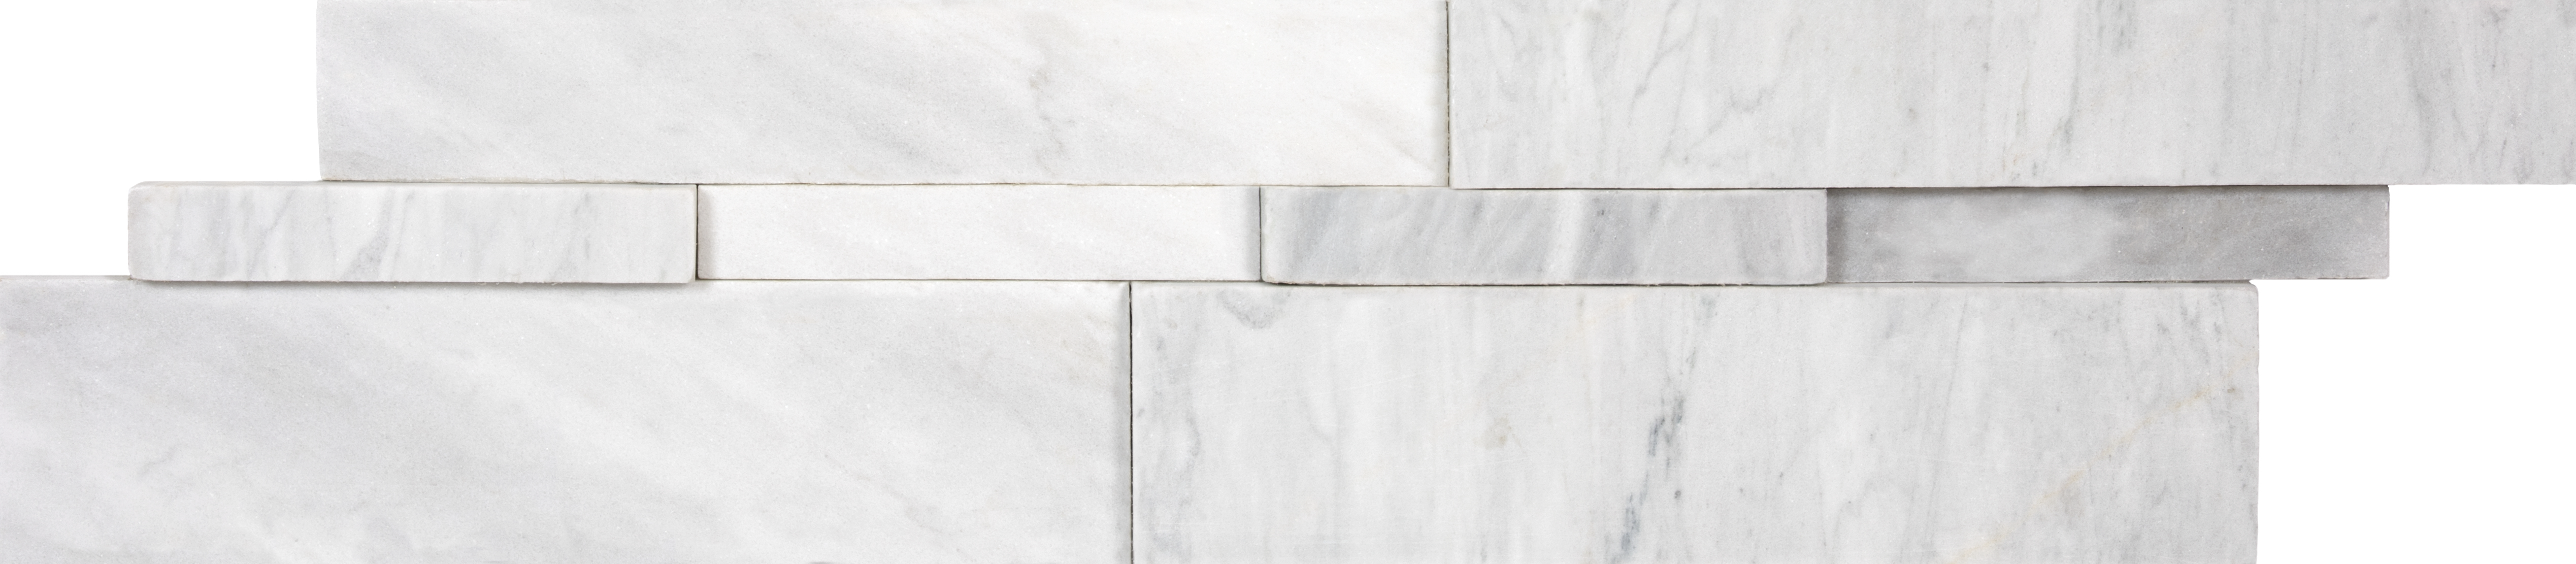 marble bianco venatino pattern natural stone wall panel from cubics anatolia collection distributed by surface group international honed finish straight edge edge 6x24 interlocking shape